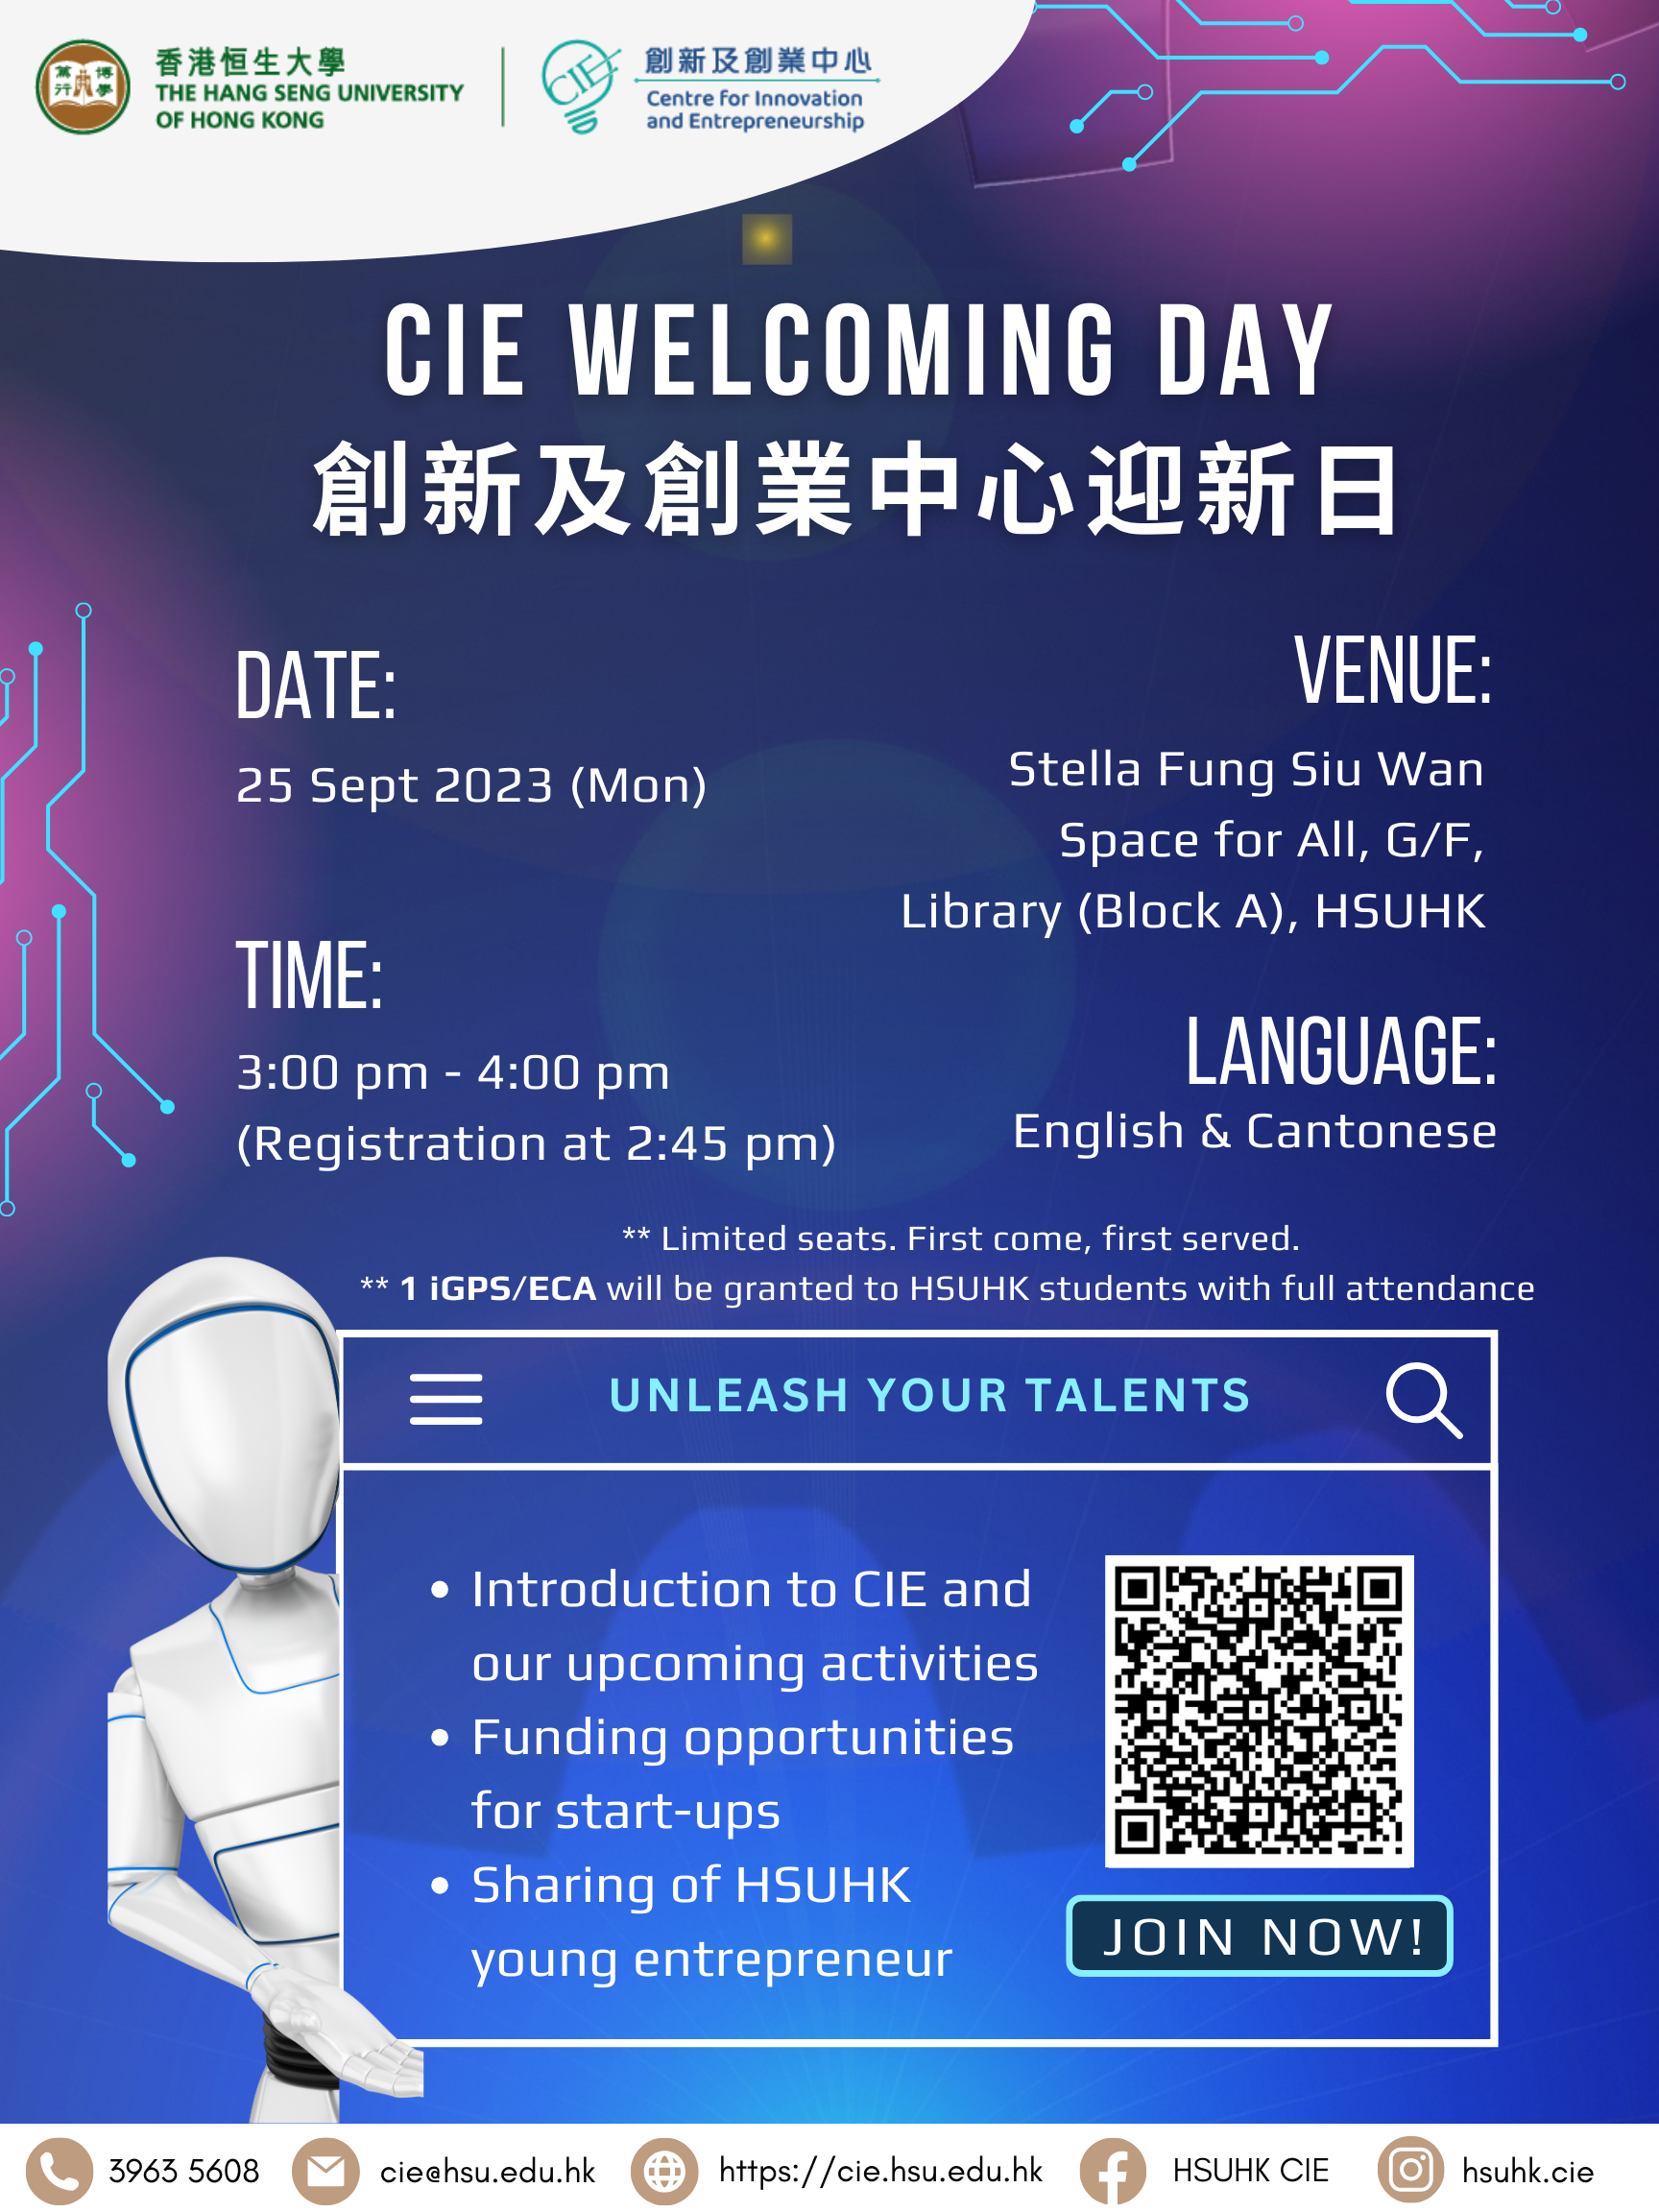 CIE Welcoming Day in 2023